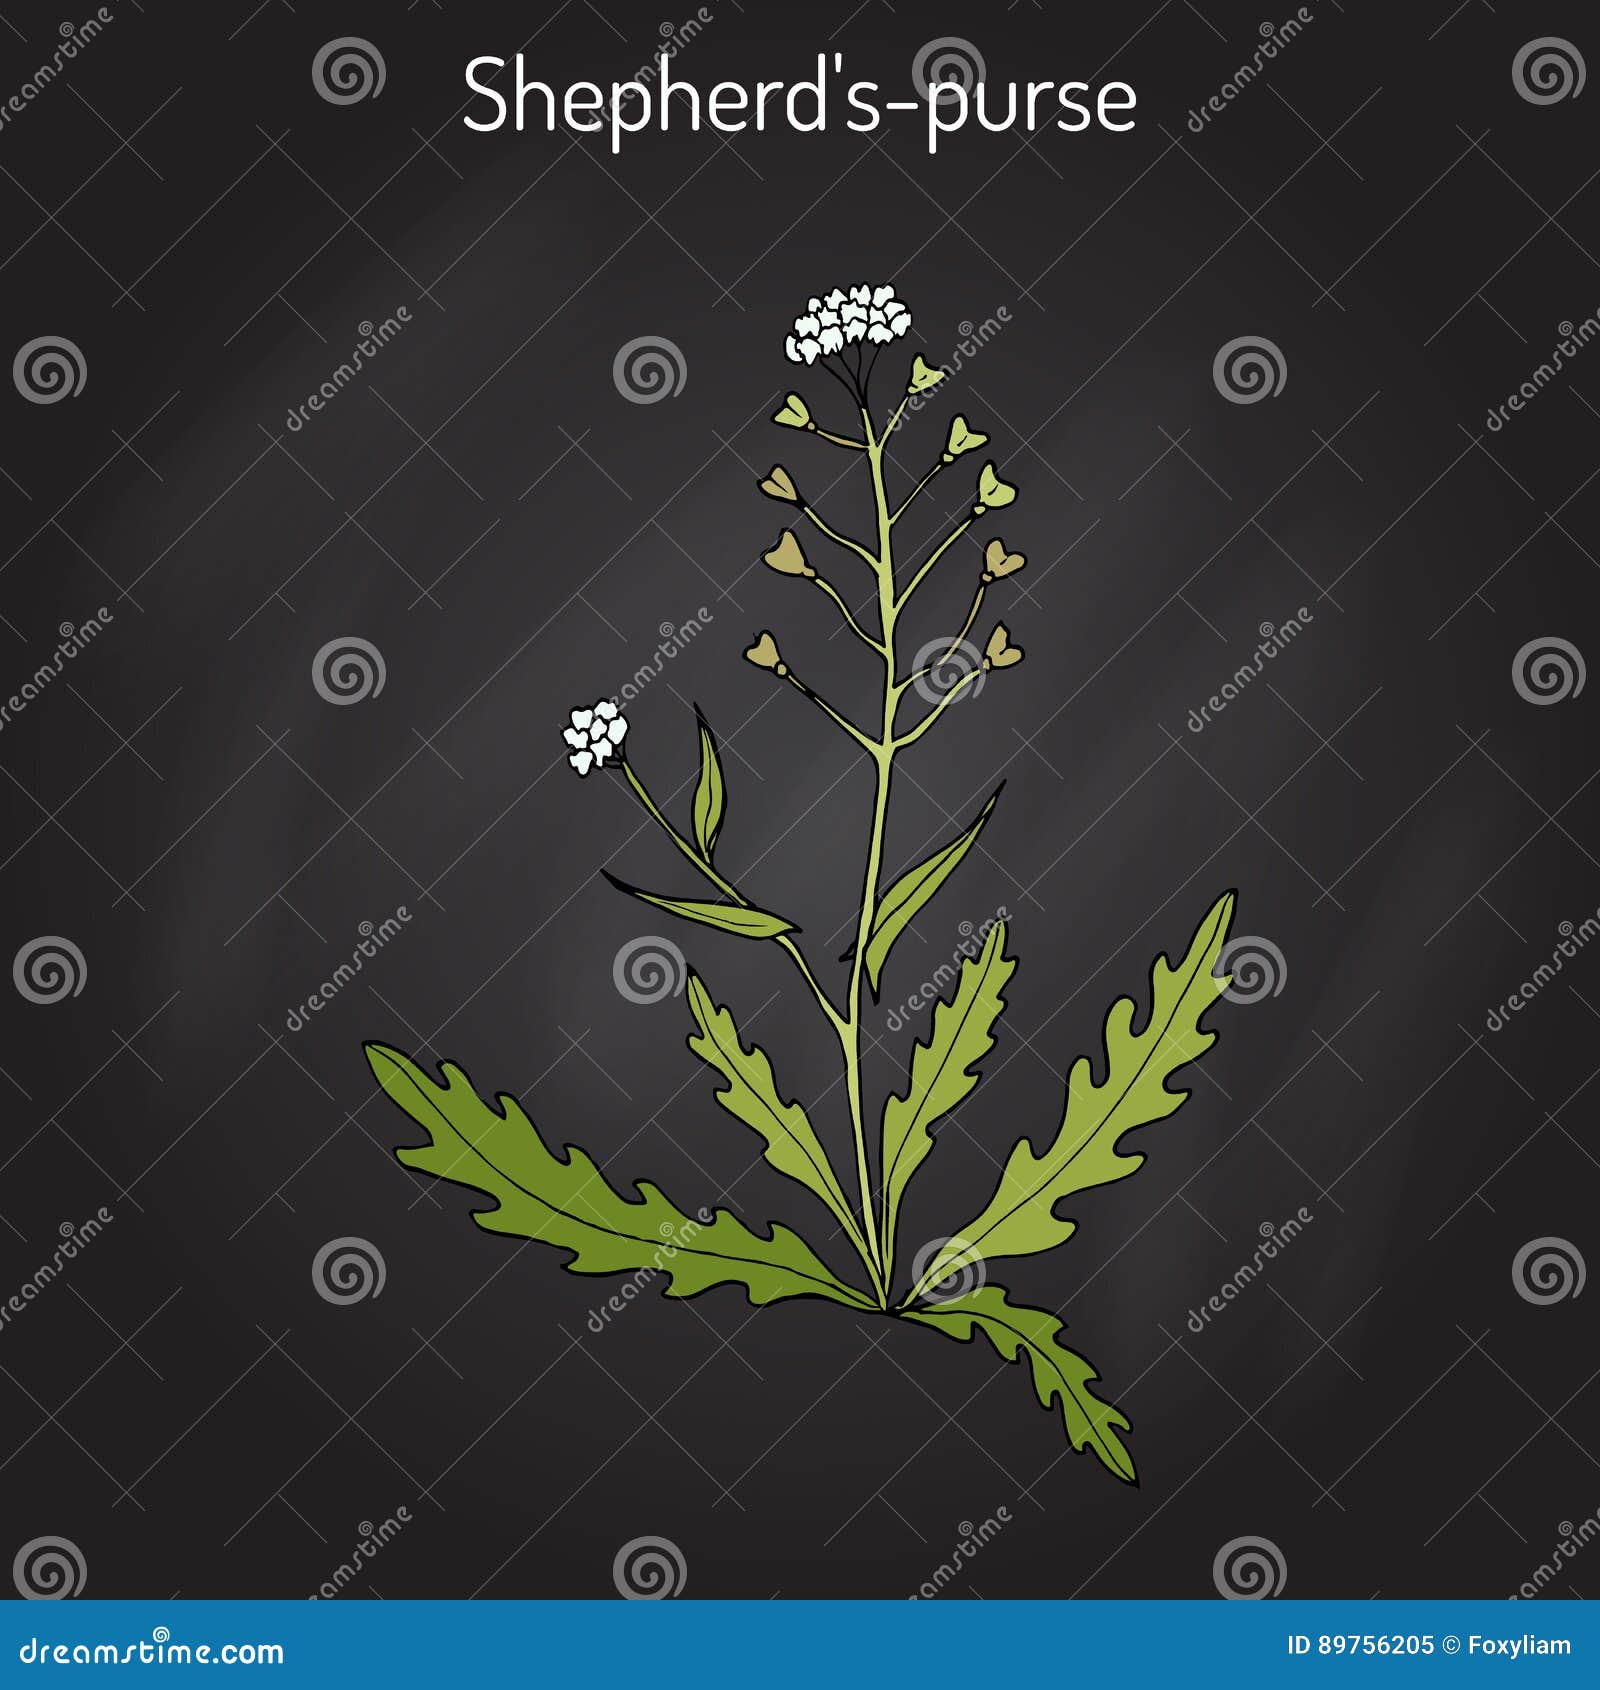 Shepherds Purse Vector Hand Drawn Plant Stock Vector (Royalty Free)  1925699657 | Shutterstock